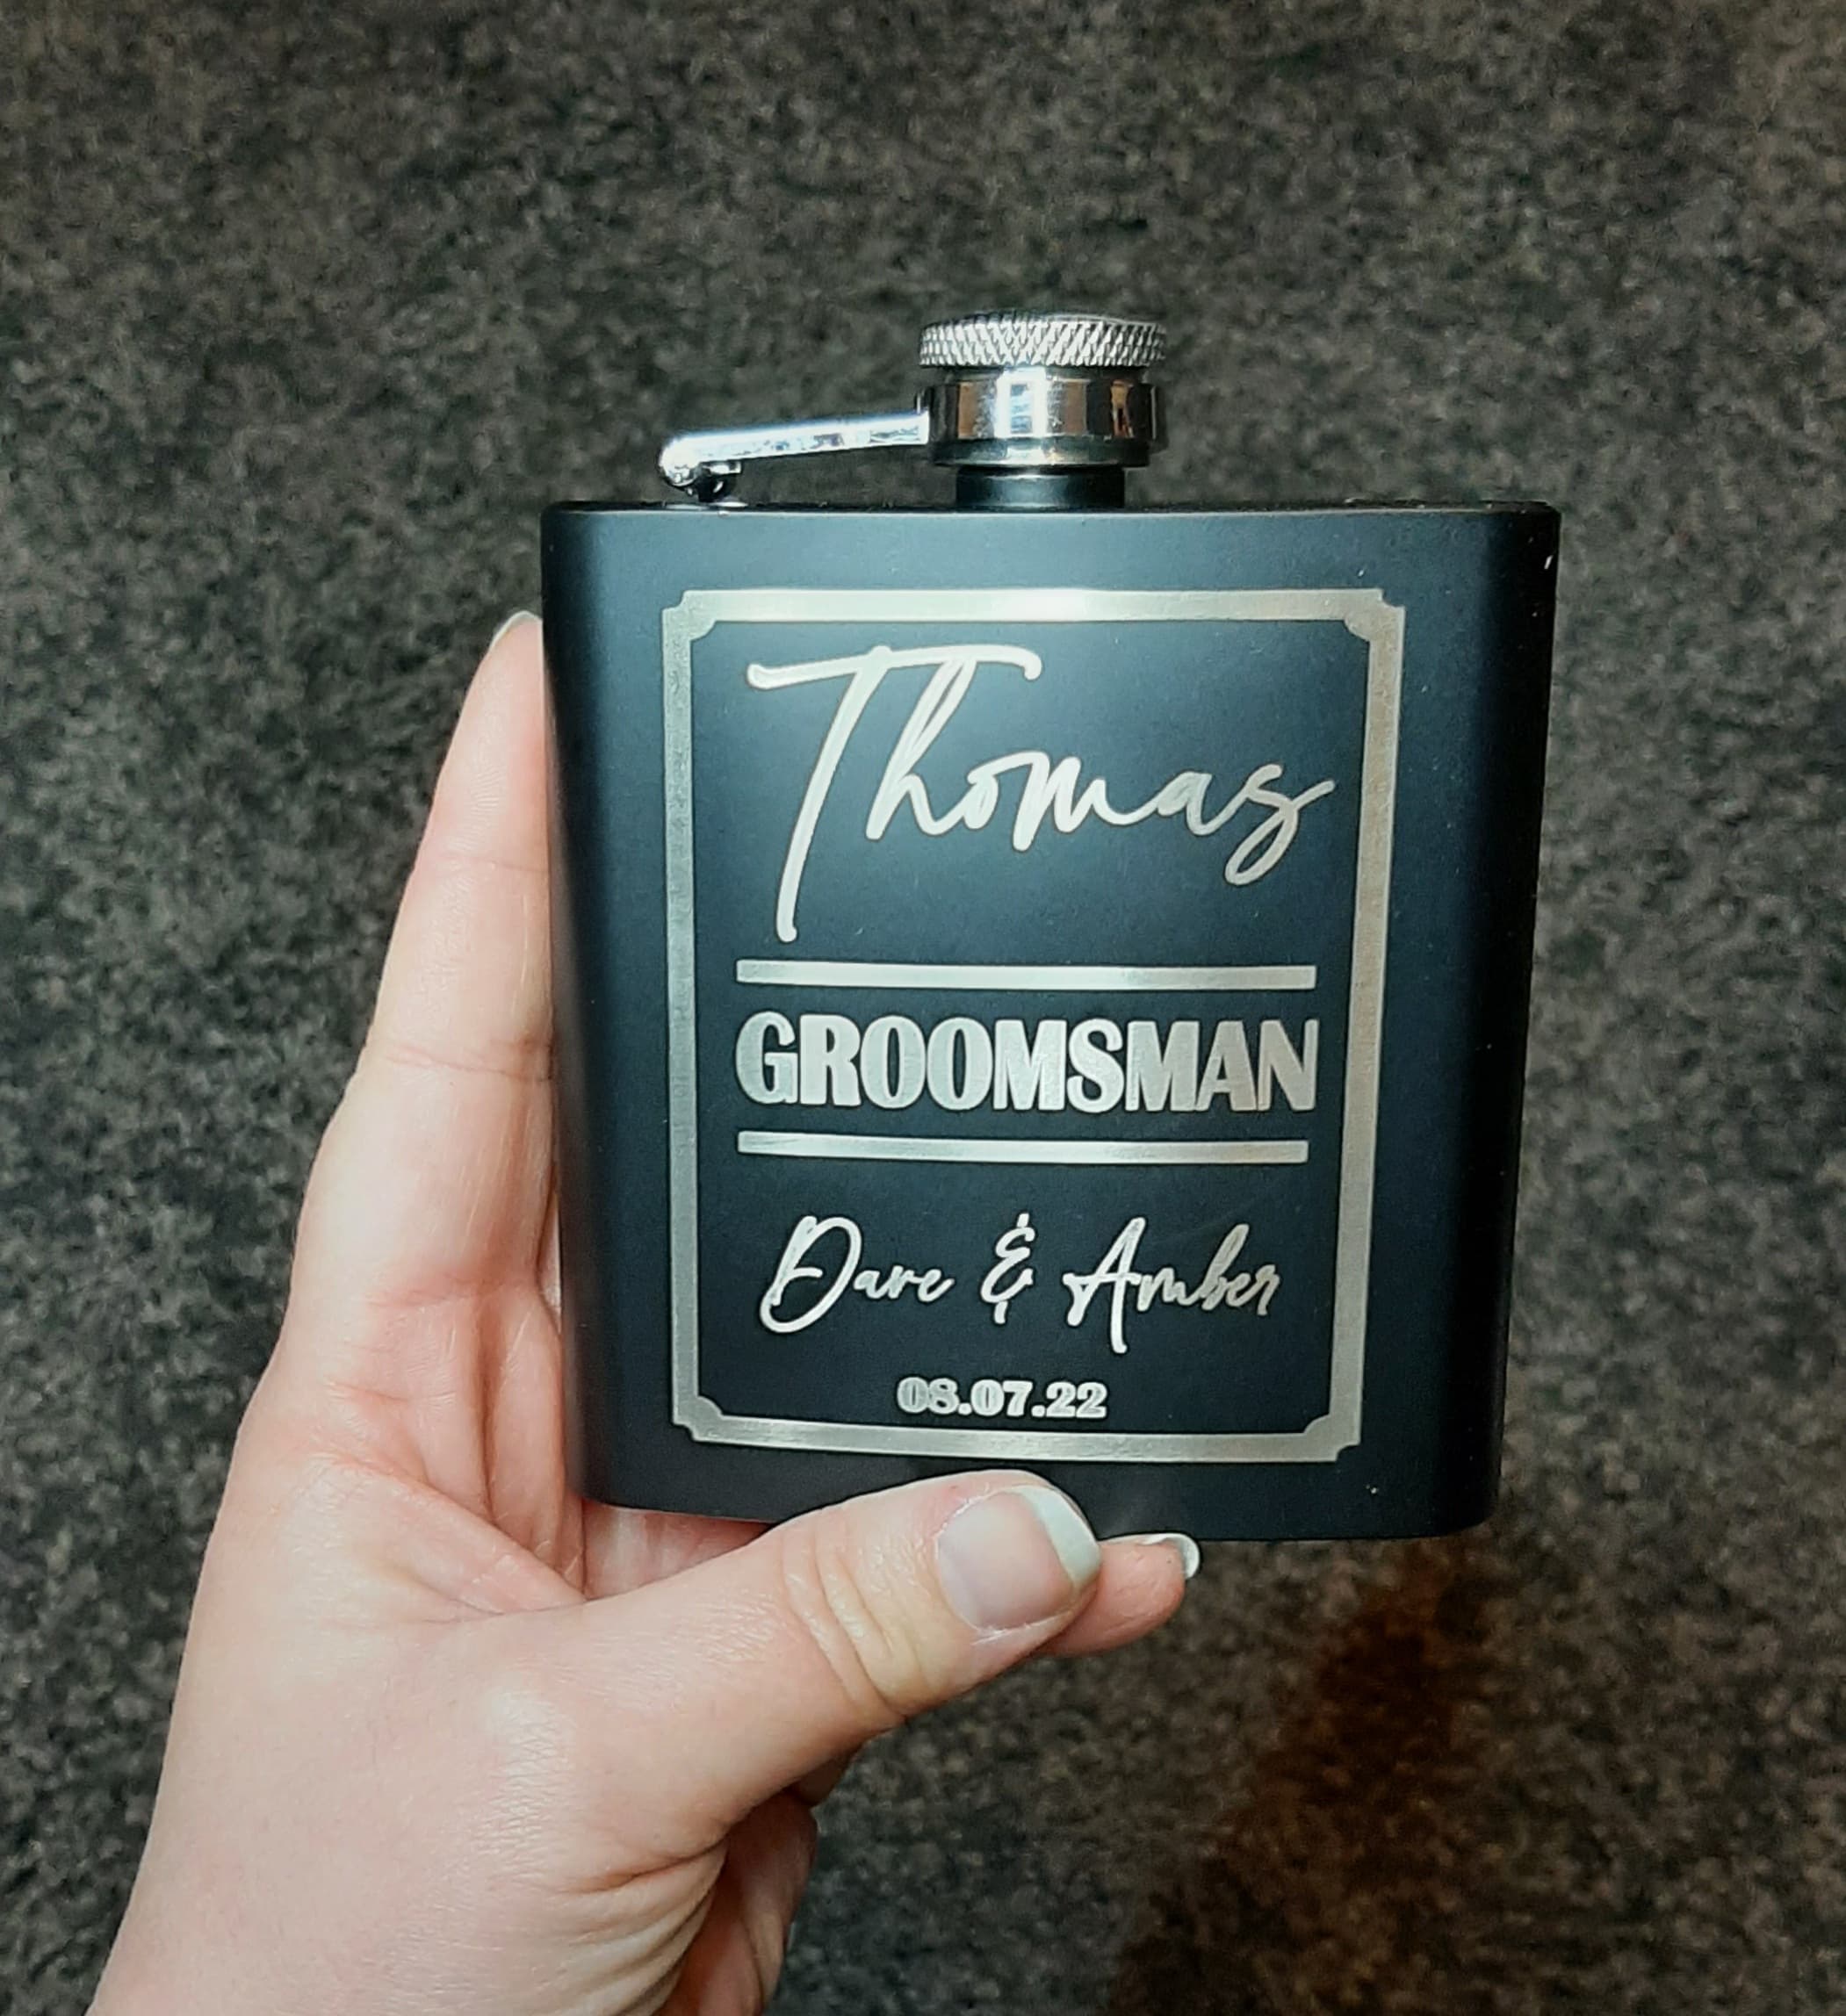 Wedding Hip Flask Gift Set mens wedding gift best man groom page boy grooms men gift occasion personalised with Name and date groom close up